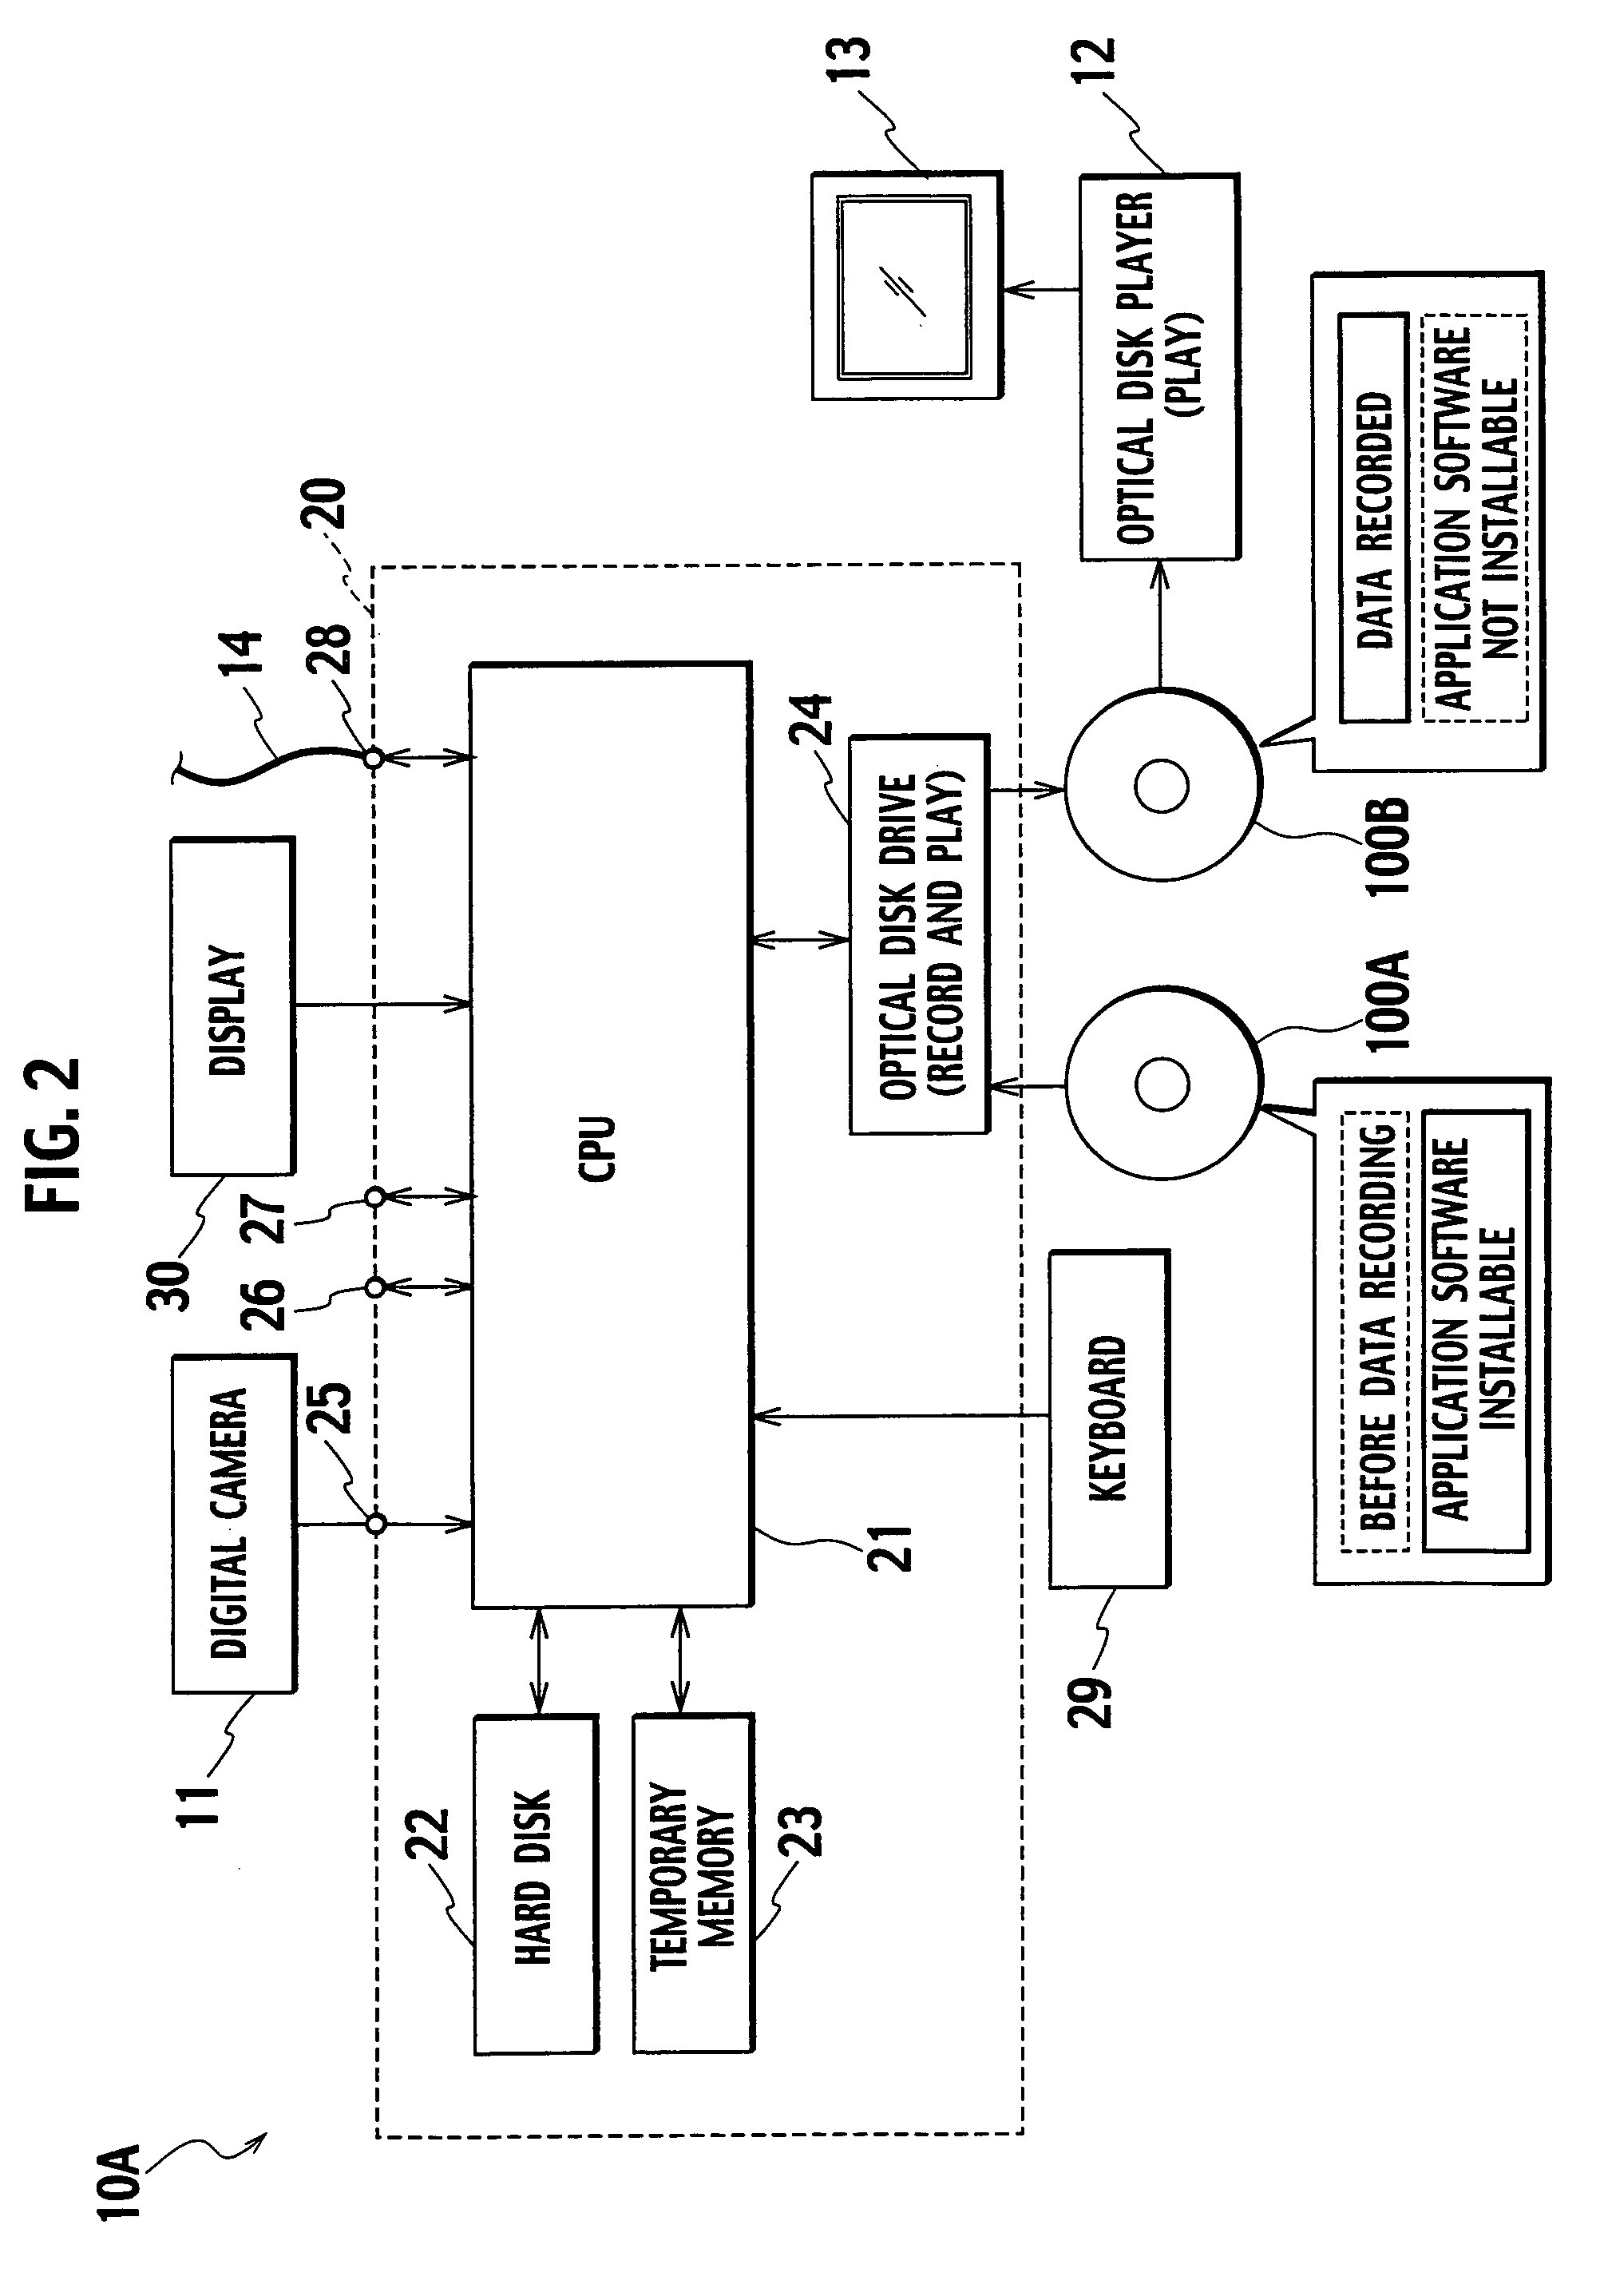 Information recording method and optical disk